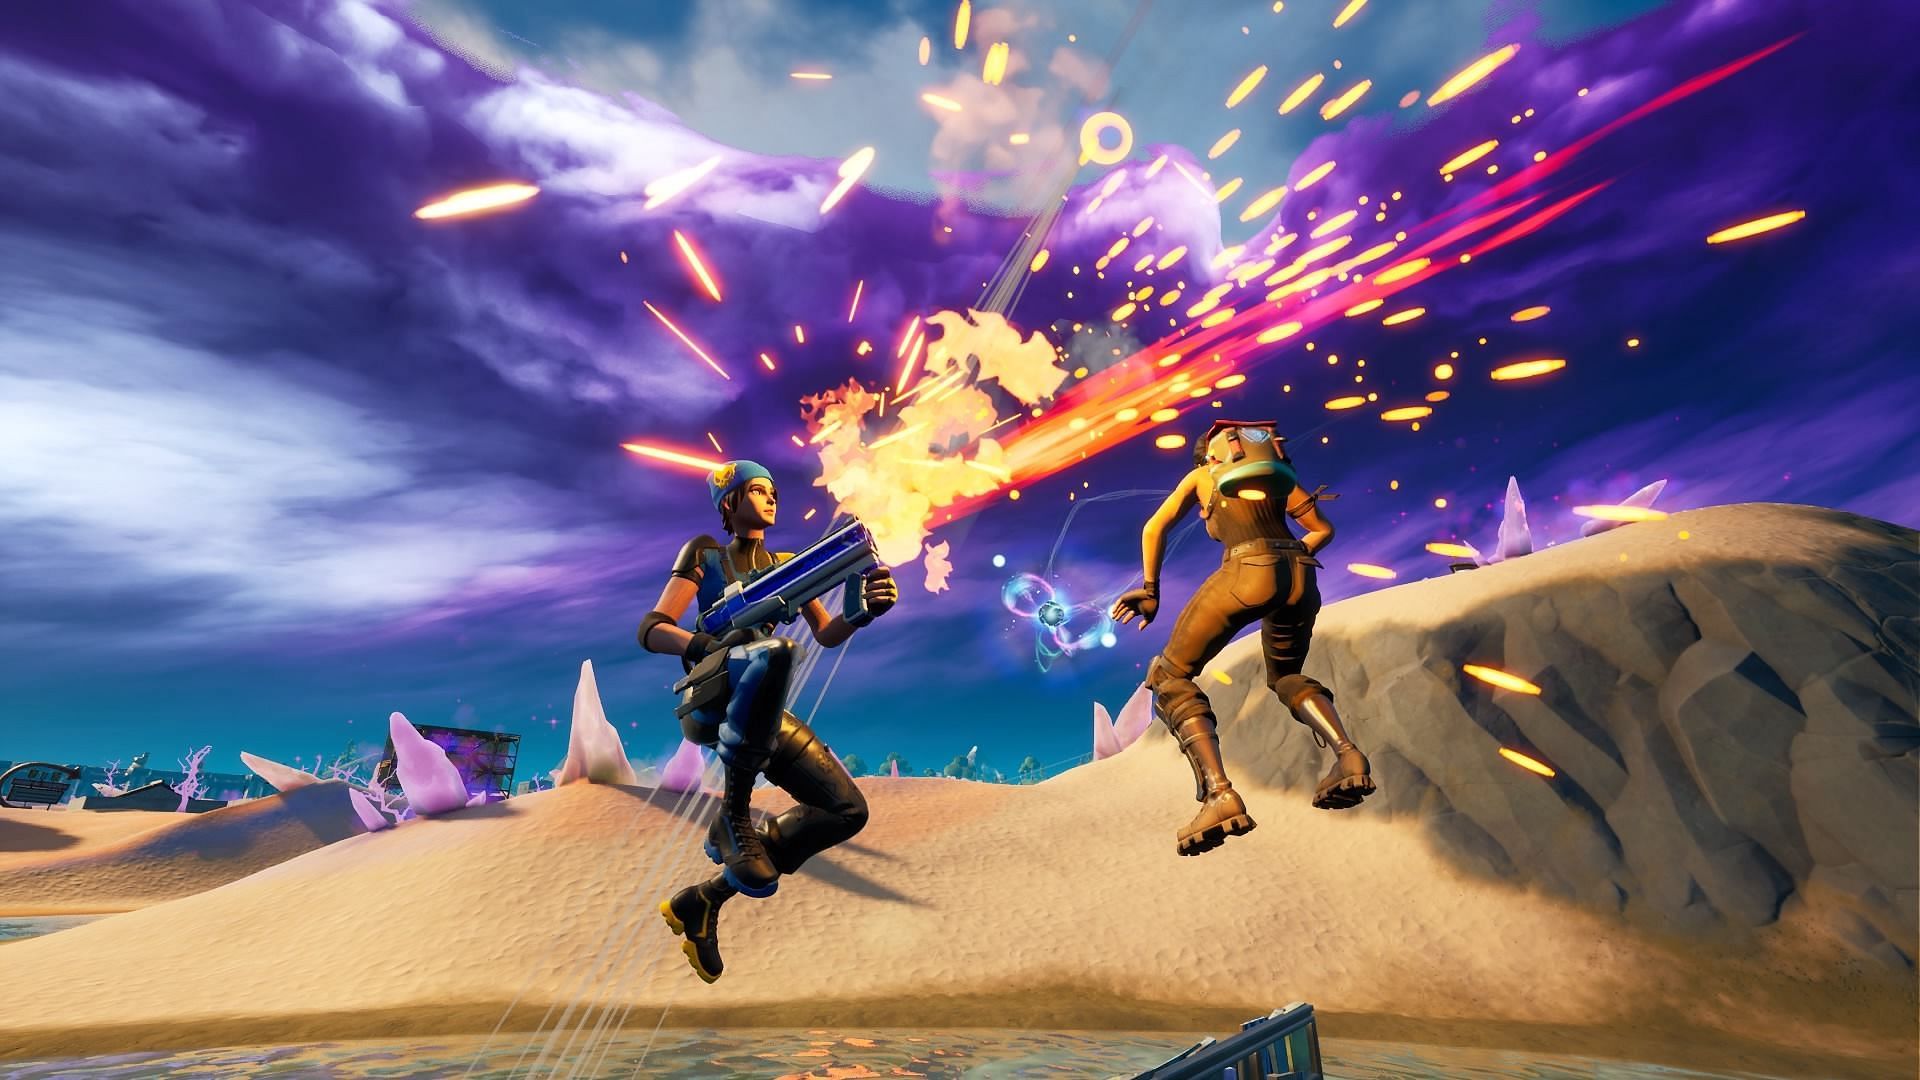 Death by shotgun is a tragic way to die in Fortnite (Image via Twitter/Leomon_Squall)